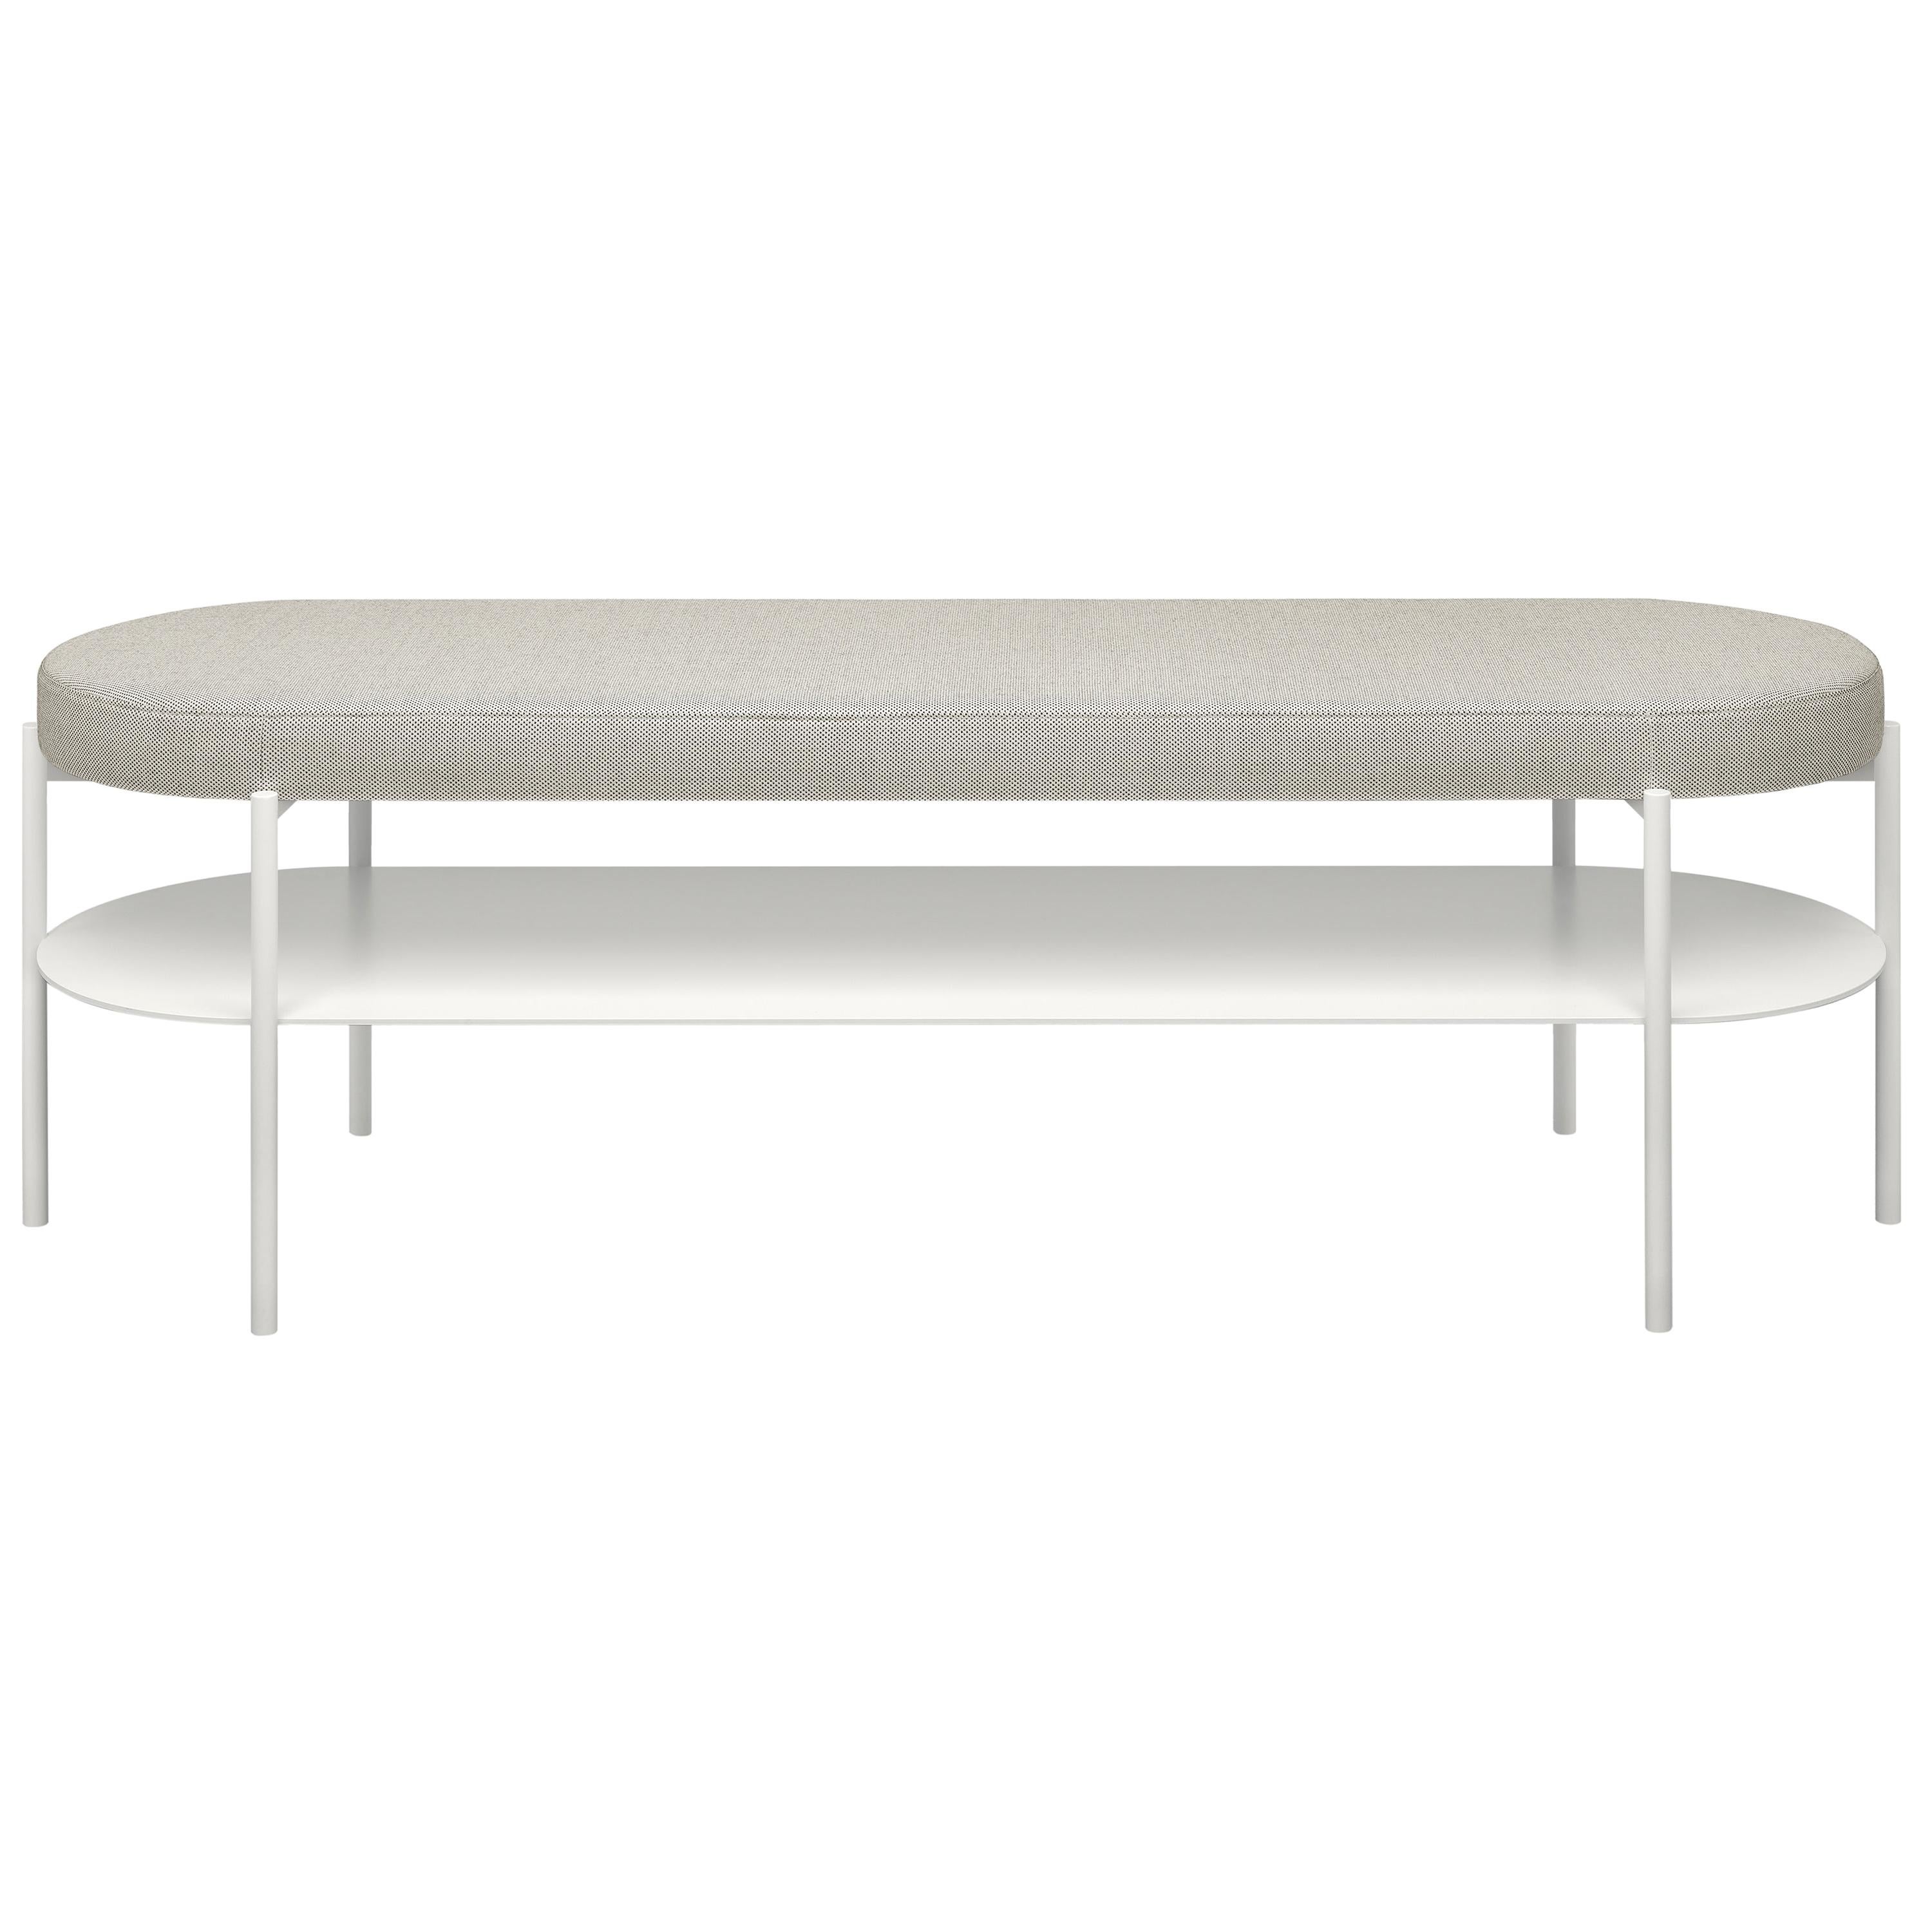 For Sale: Gray (Basel 123) e15 Customizable ELBE III Bench  by Marguerre, Besau and Schöning